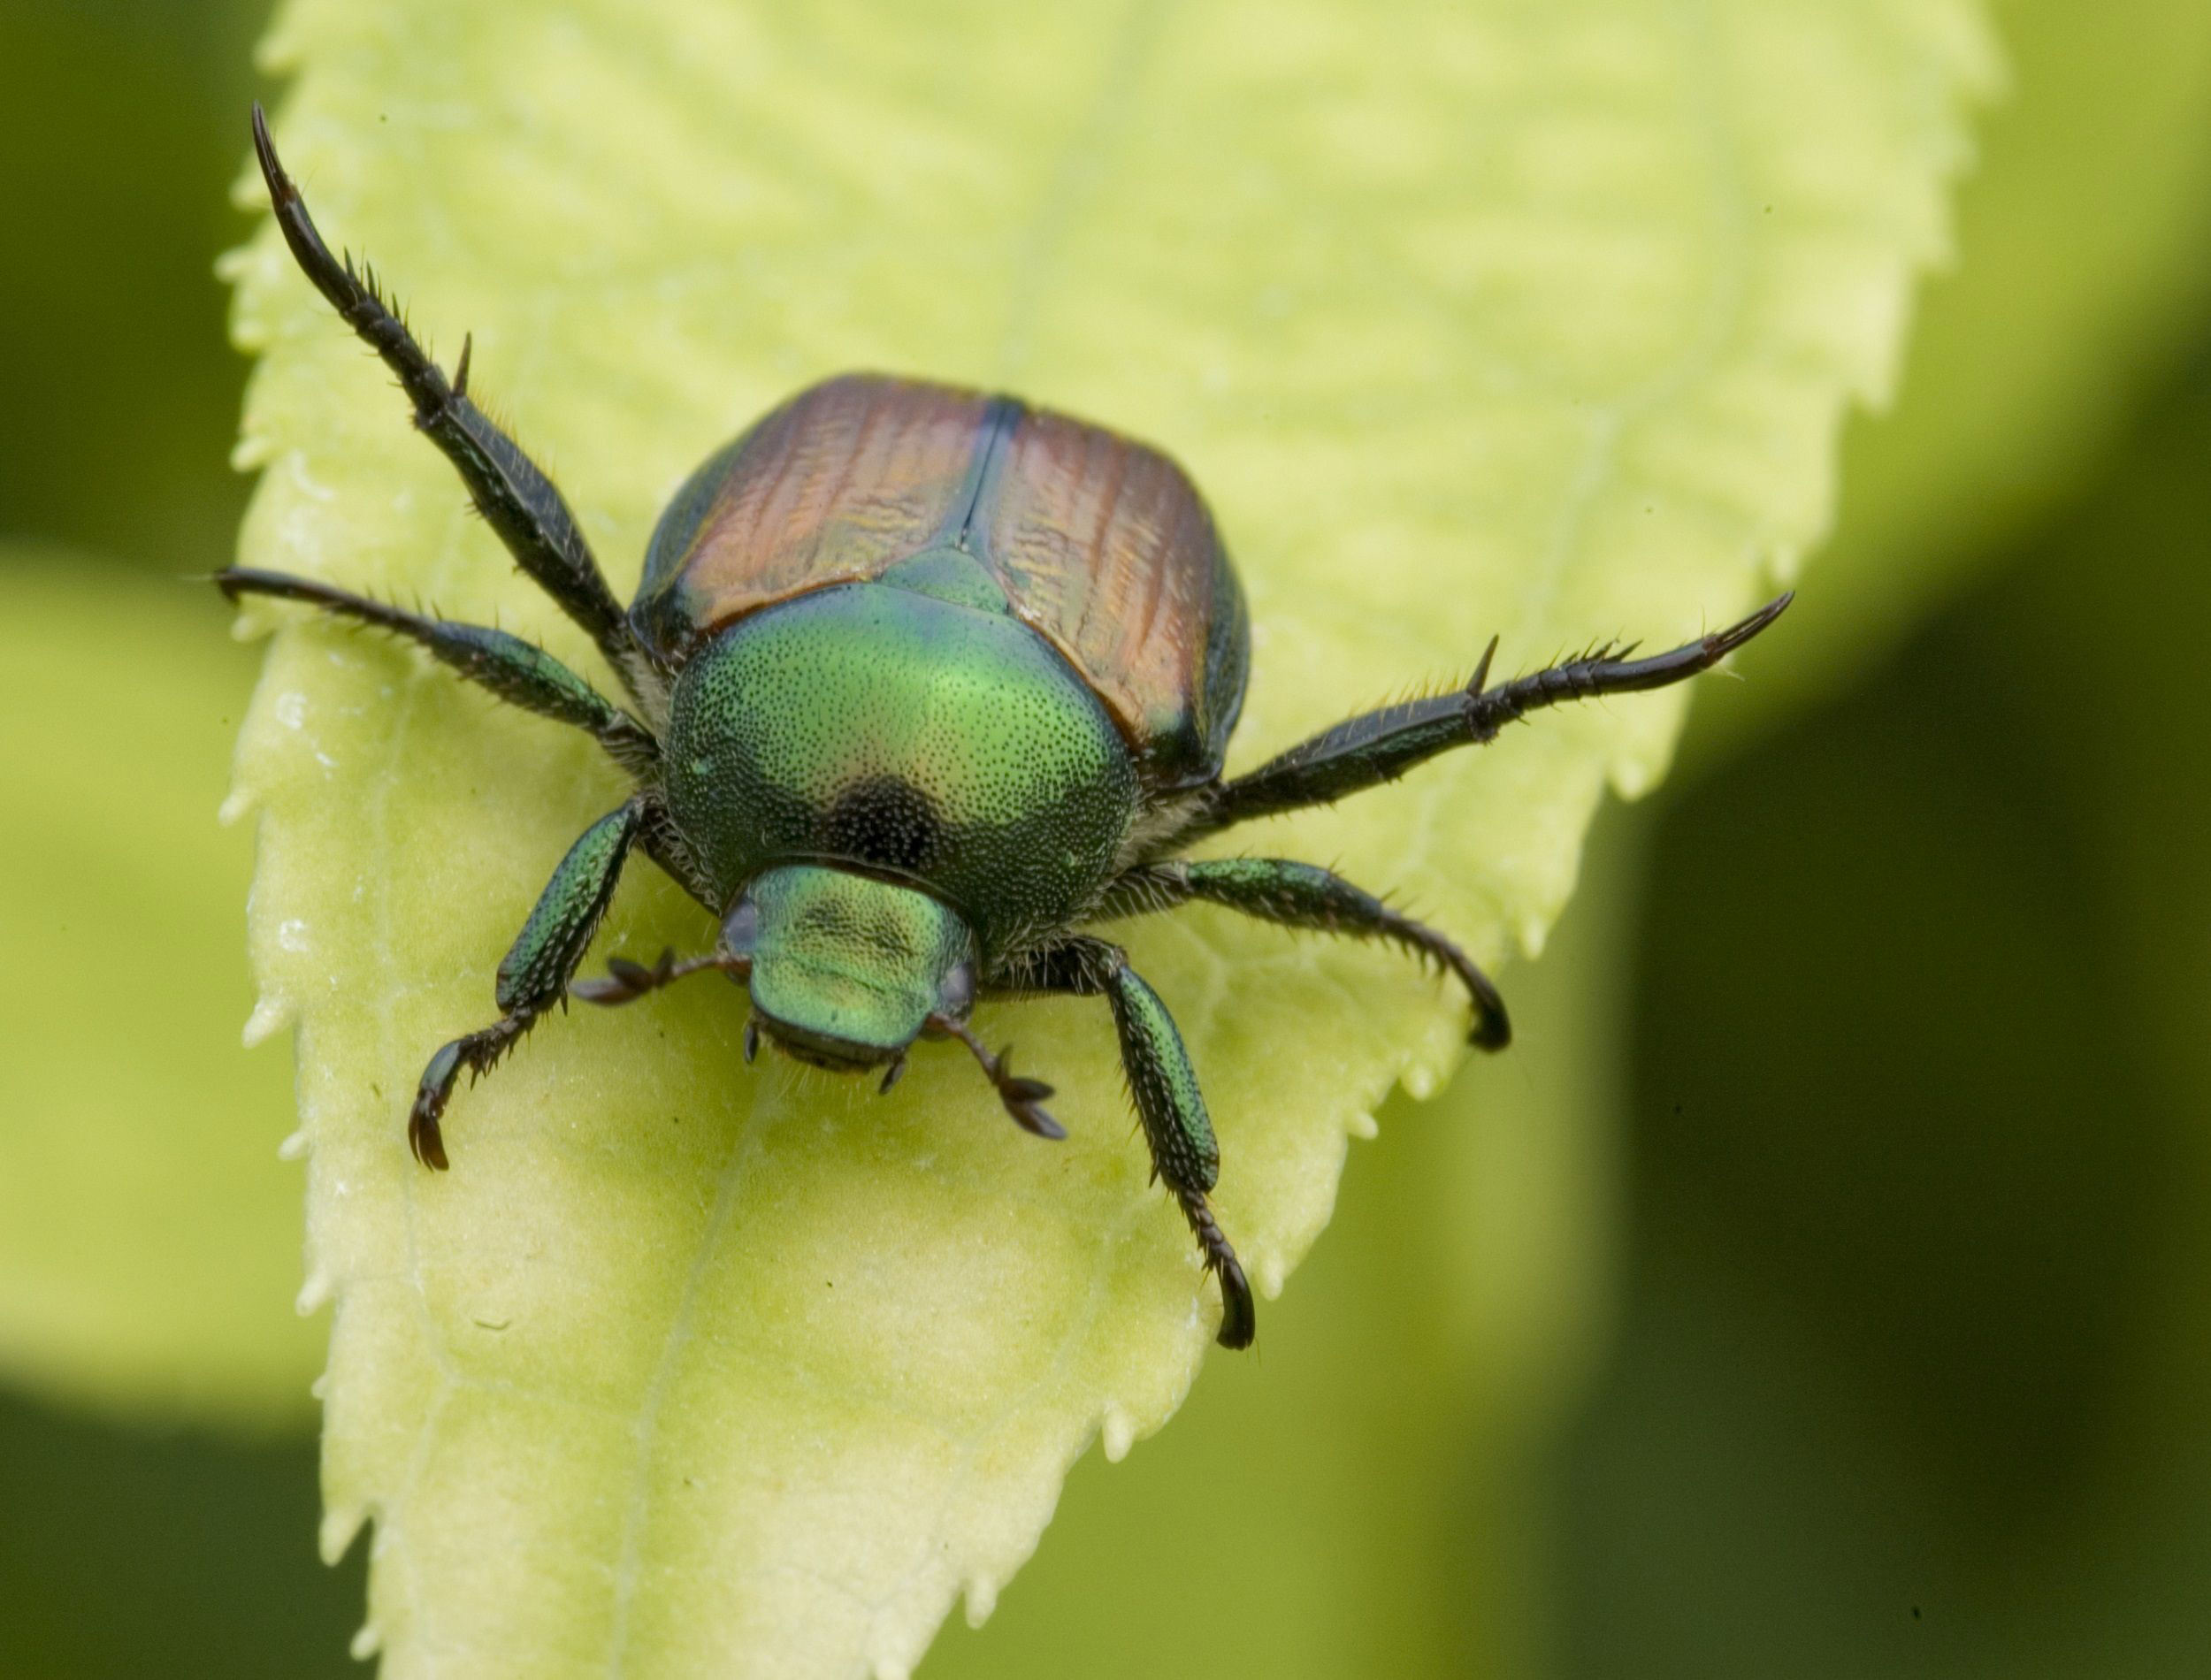 Garden Pest Detection: How to Spot and Identify Common Bugs